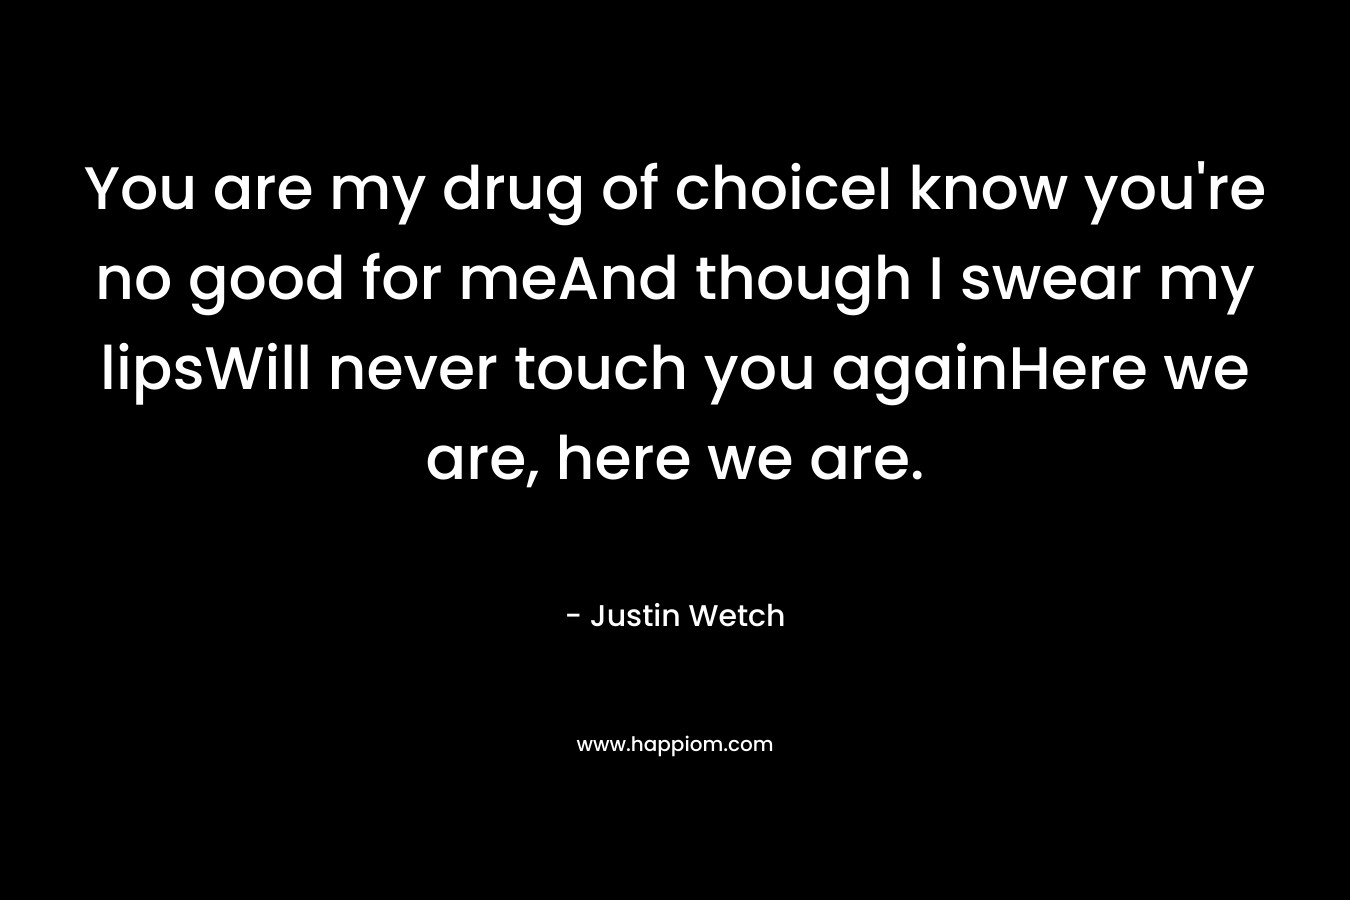 You are my drug of choiceI know you’re no good for meAnd though I swear my lipsWill never touch you againHere we are, here we are. – Justin Wetch